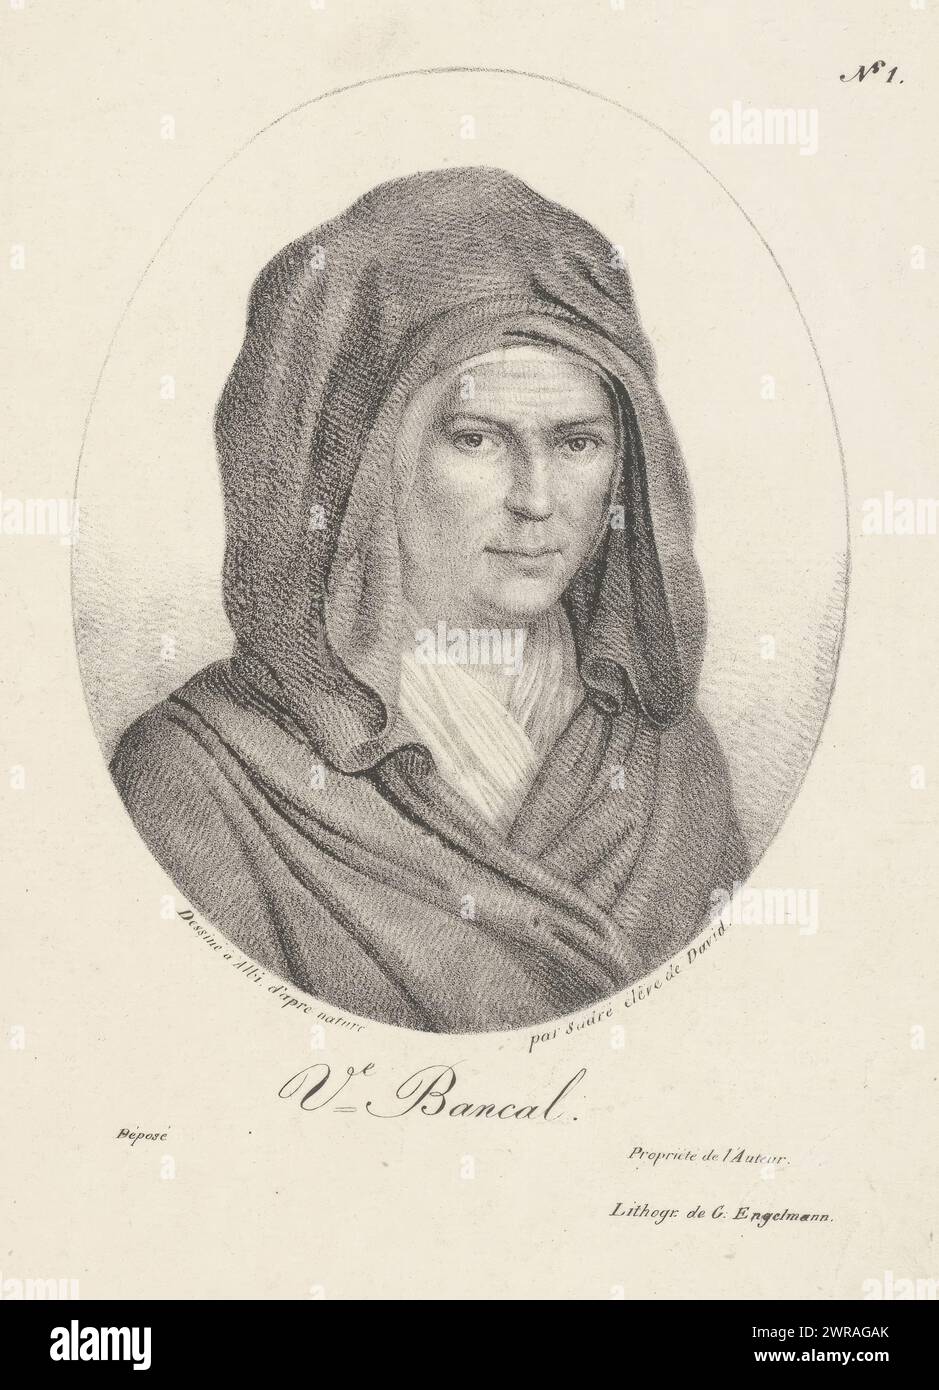 Portrait of widow Catherine Bancal, Ve. Bancal (title on object), Main characters in the Fualdès affair (series title), print maker: Jean Pierre Sudre (1783-1866), after own design by: Jean Pierre Sudre (1783-1866), printer: Gottfried Engelmann, Paris, 1818, paper, height 257 mm × width 178 mm, print Stock Photo